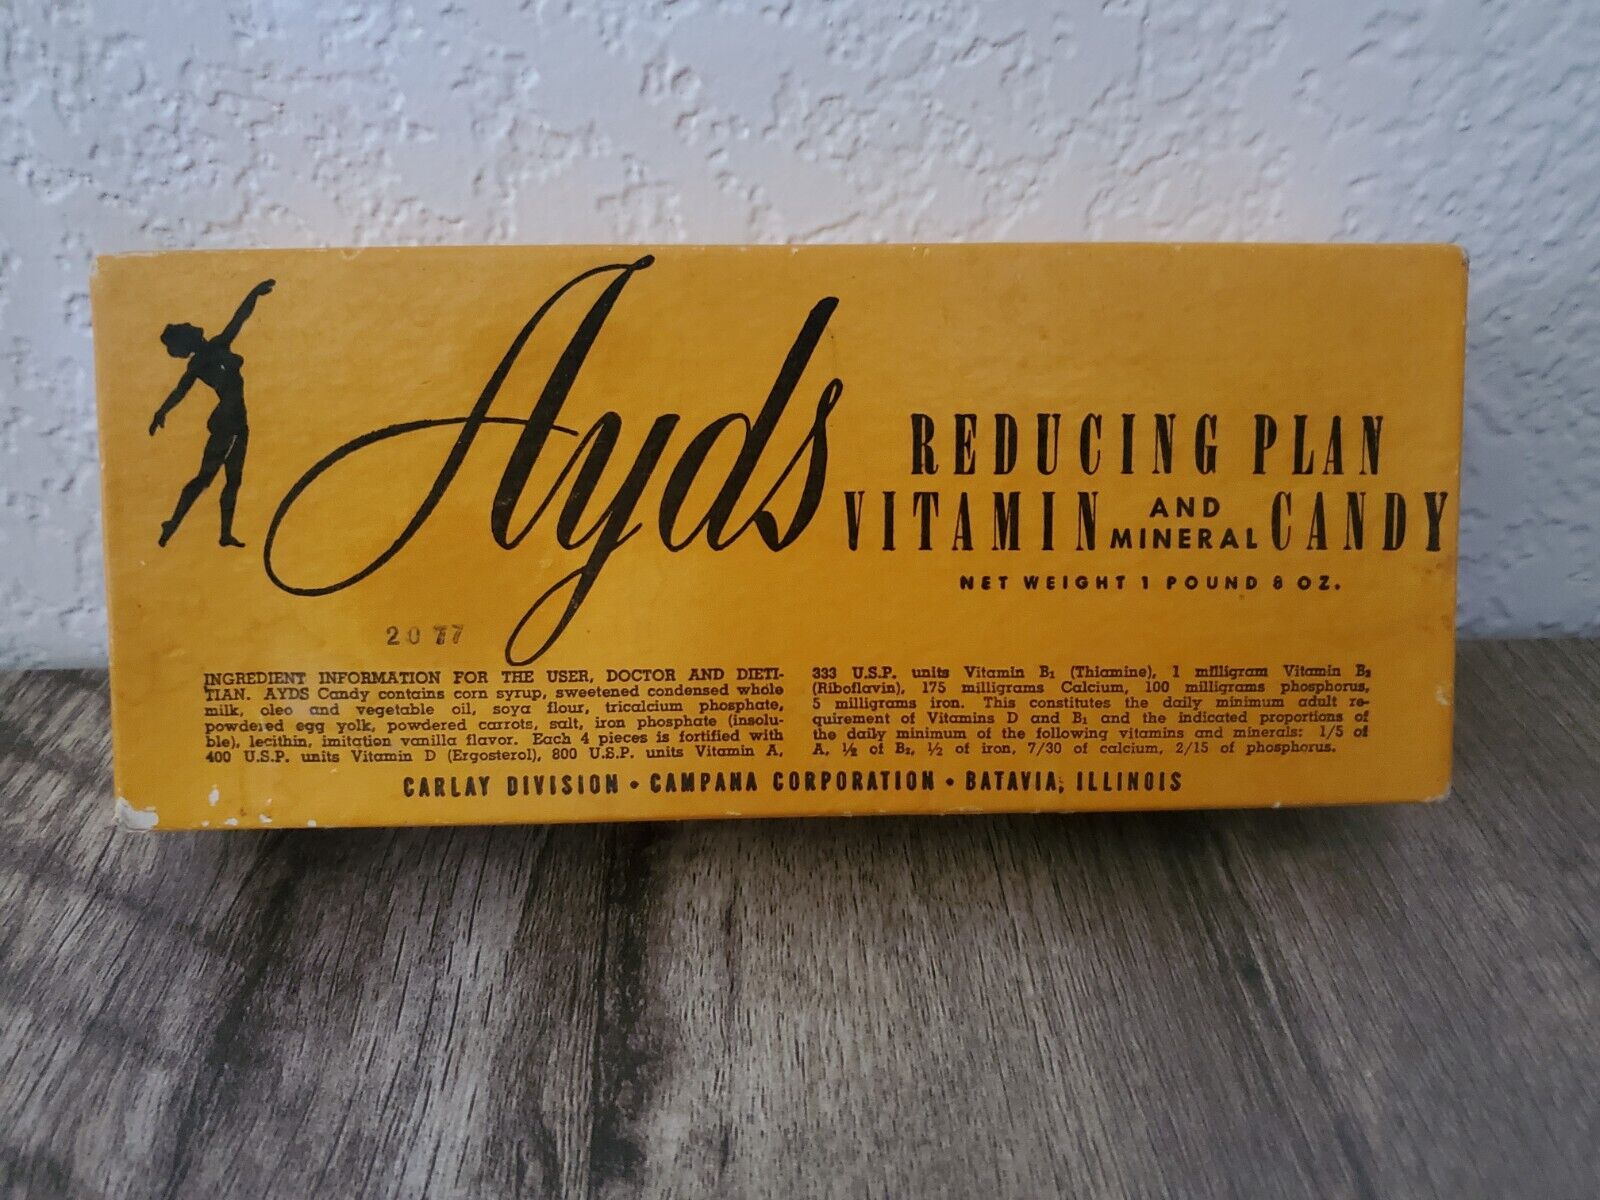 Vintage AYDS REDUCING PLAN VITAMIN & MINERAL DIETARY Fudge Candy Supplement Box